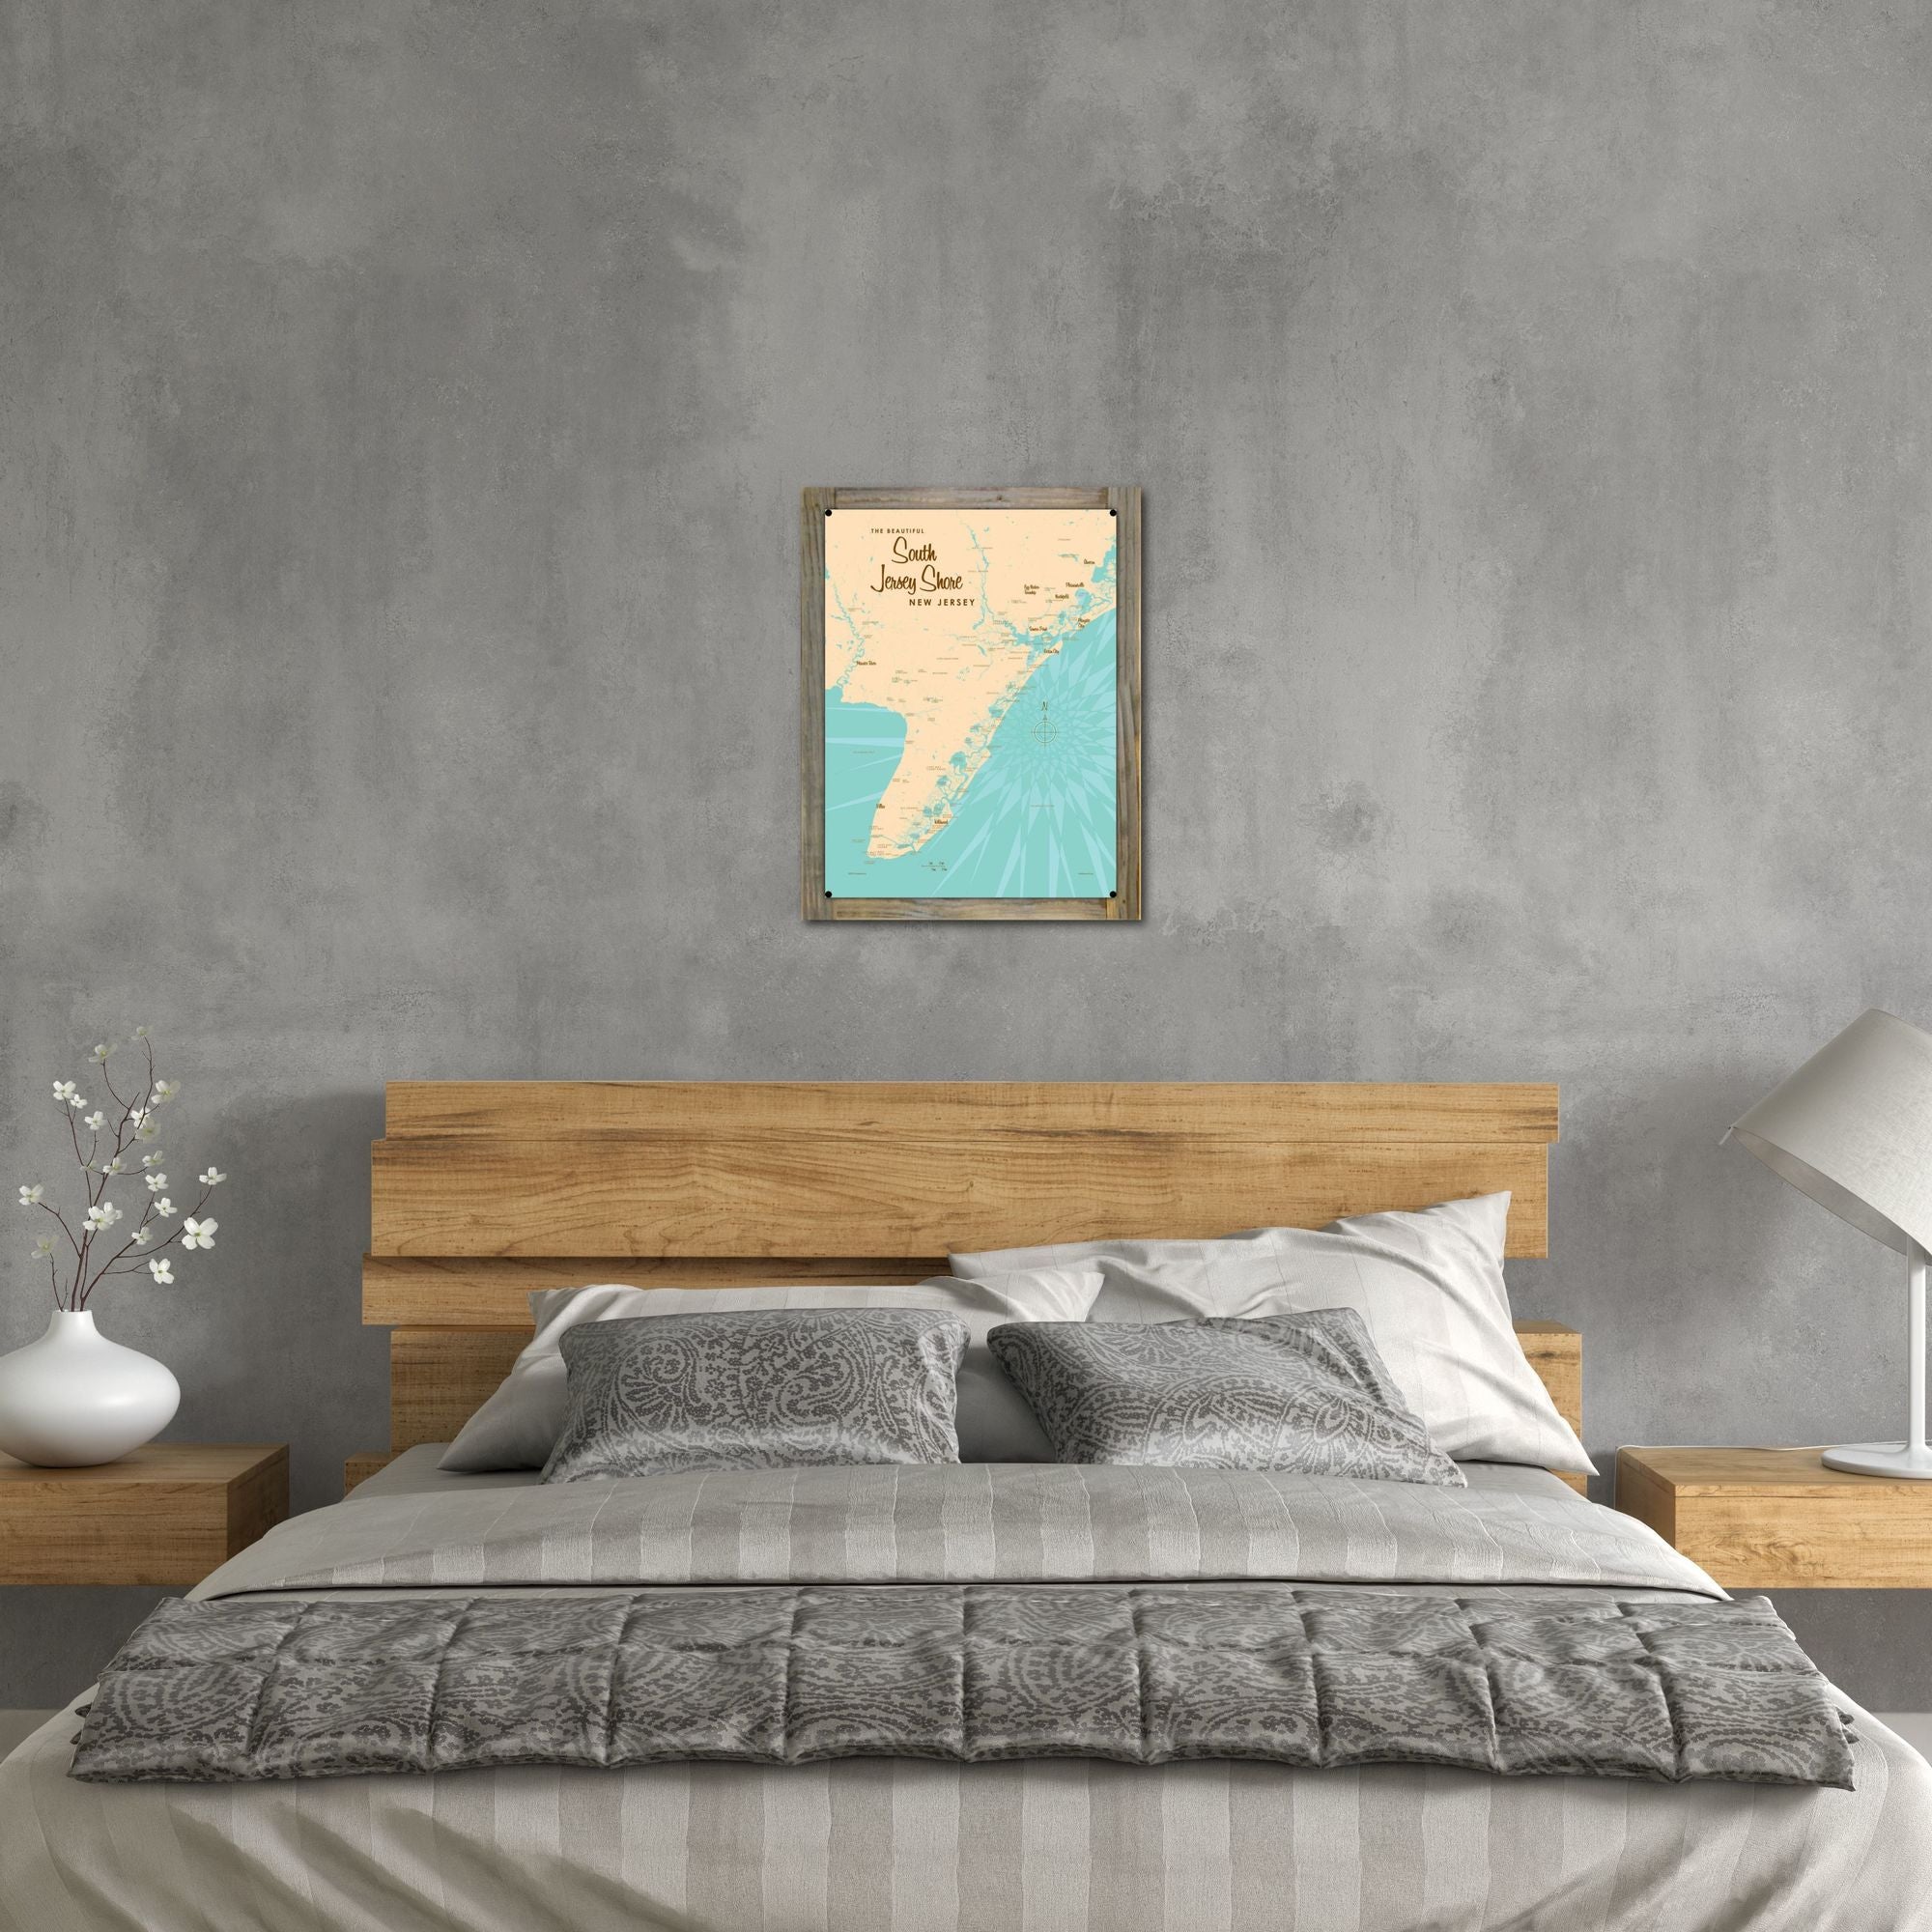 South Jersey Shore New Jersey, Wood-Mounted Metal Sign Map Art